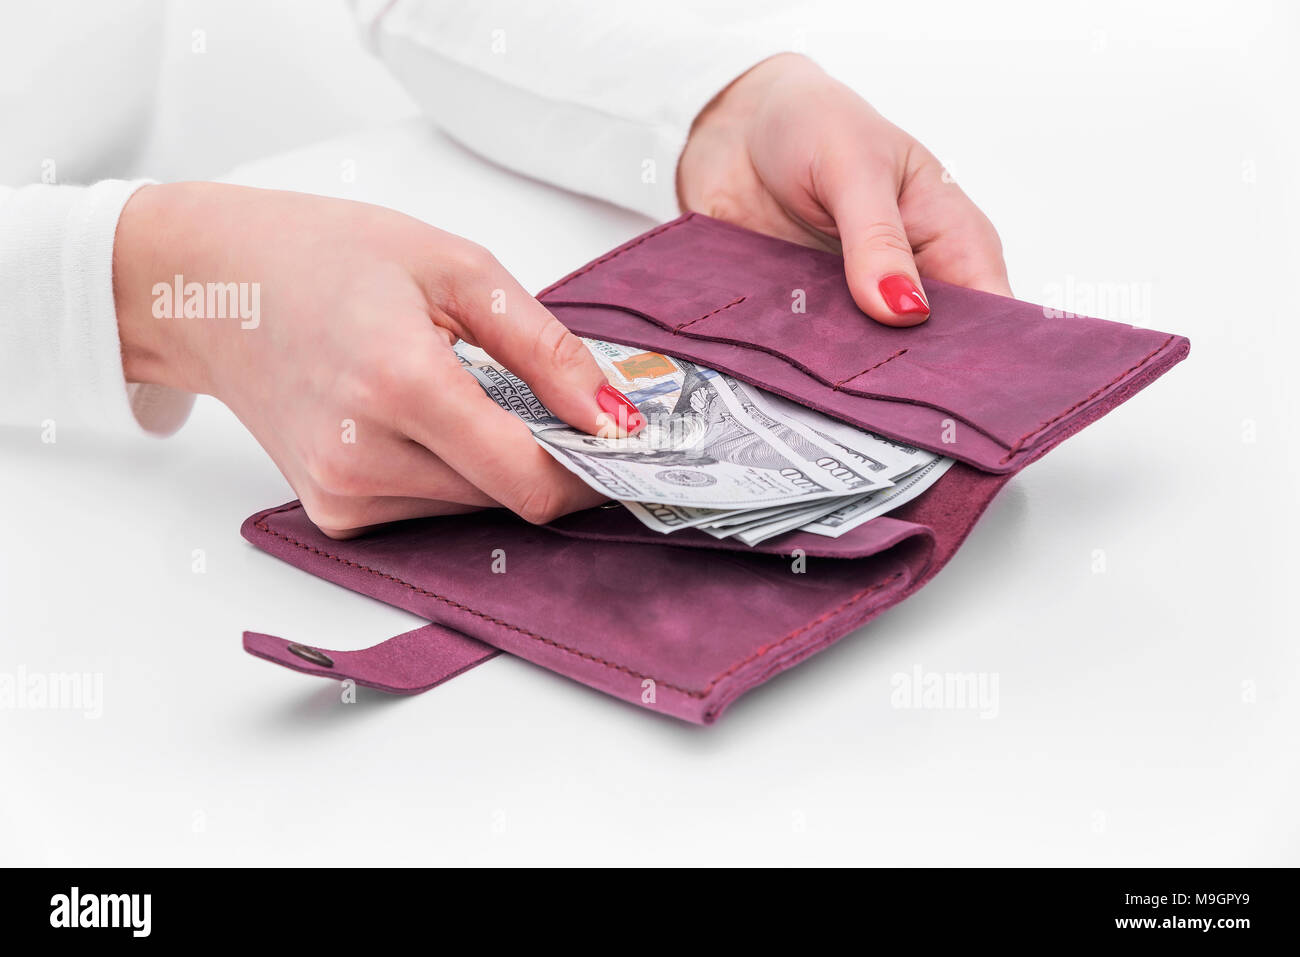 Purse with money in female hands. Stock Photo